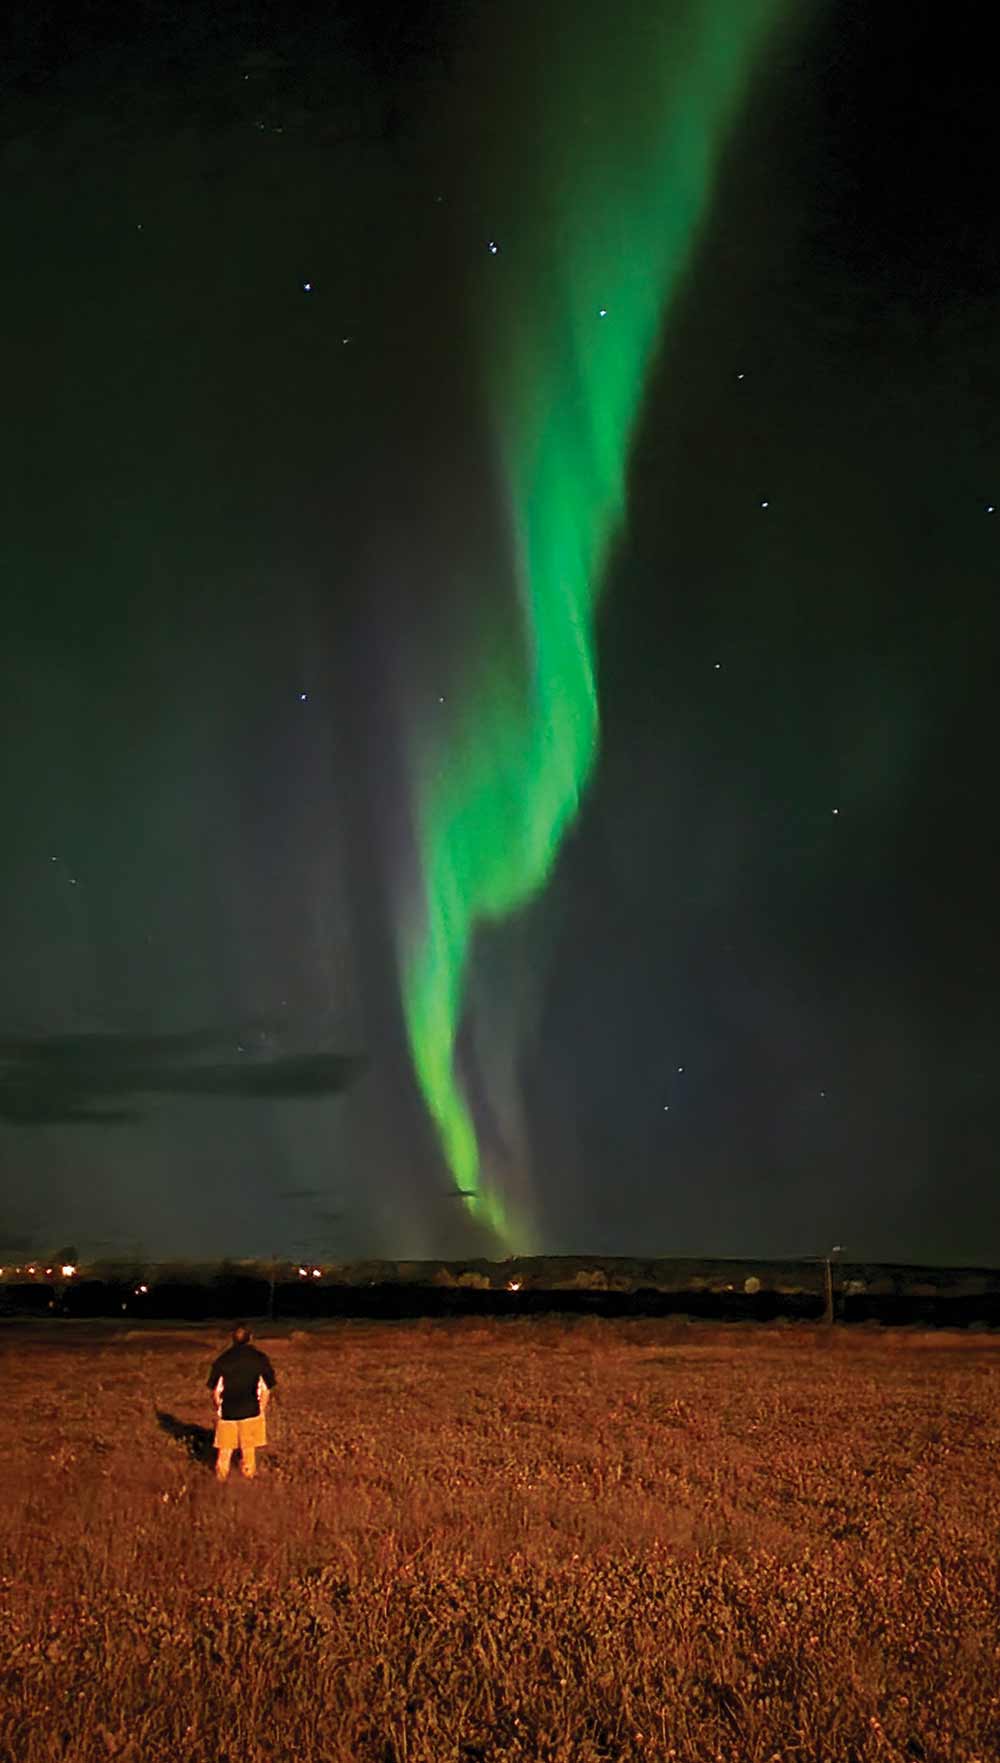 A rallier stands in a field looking up at the Northern Lights.